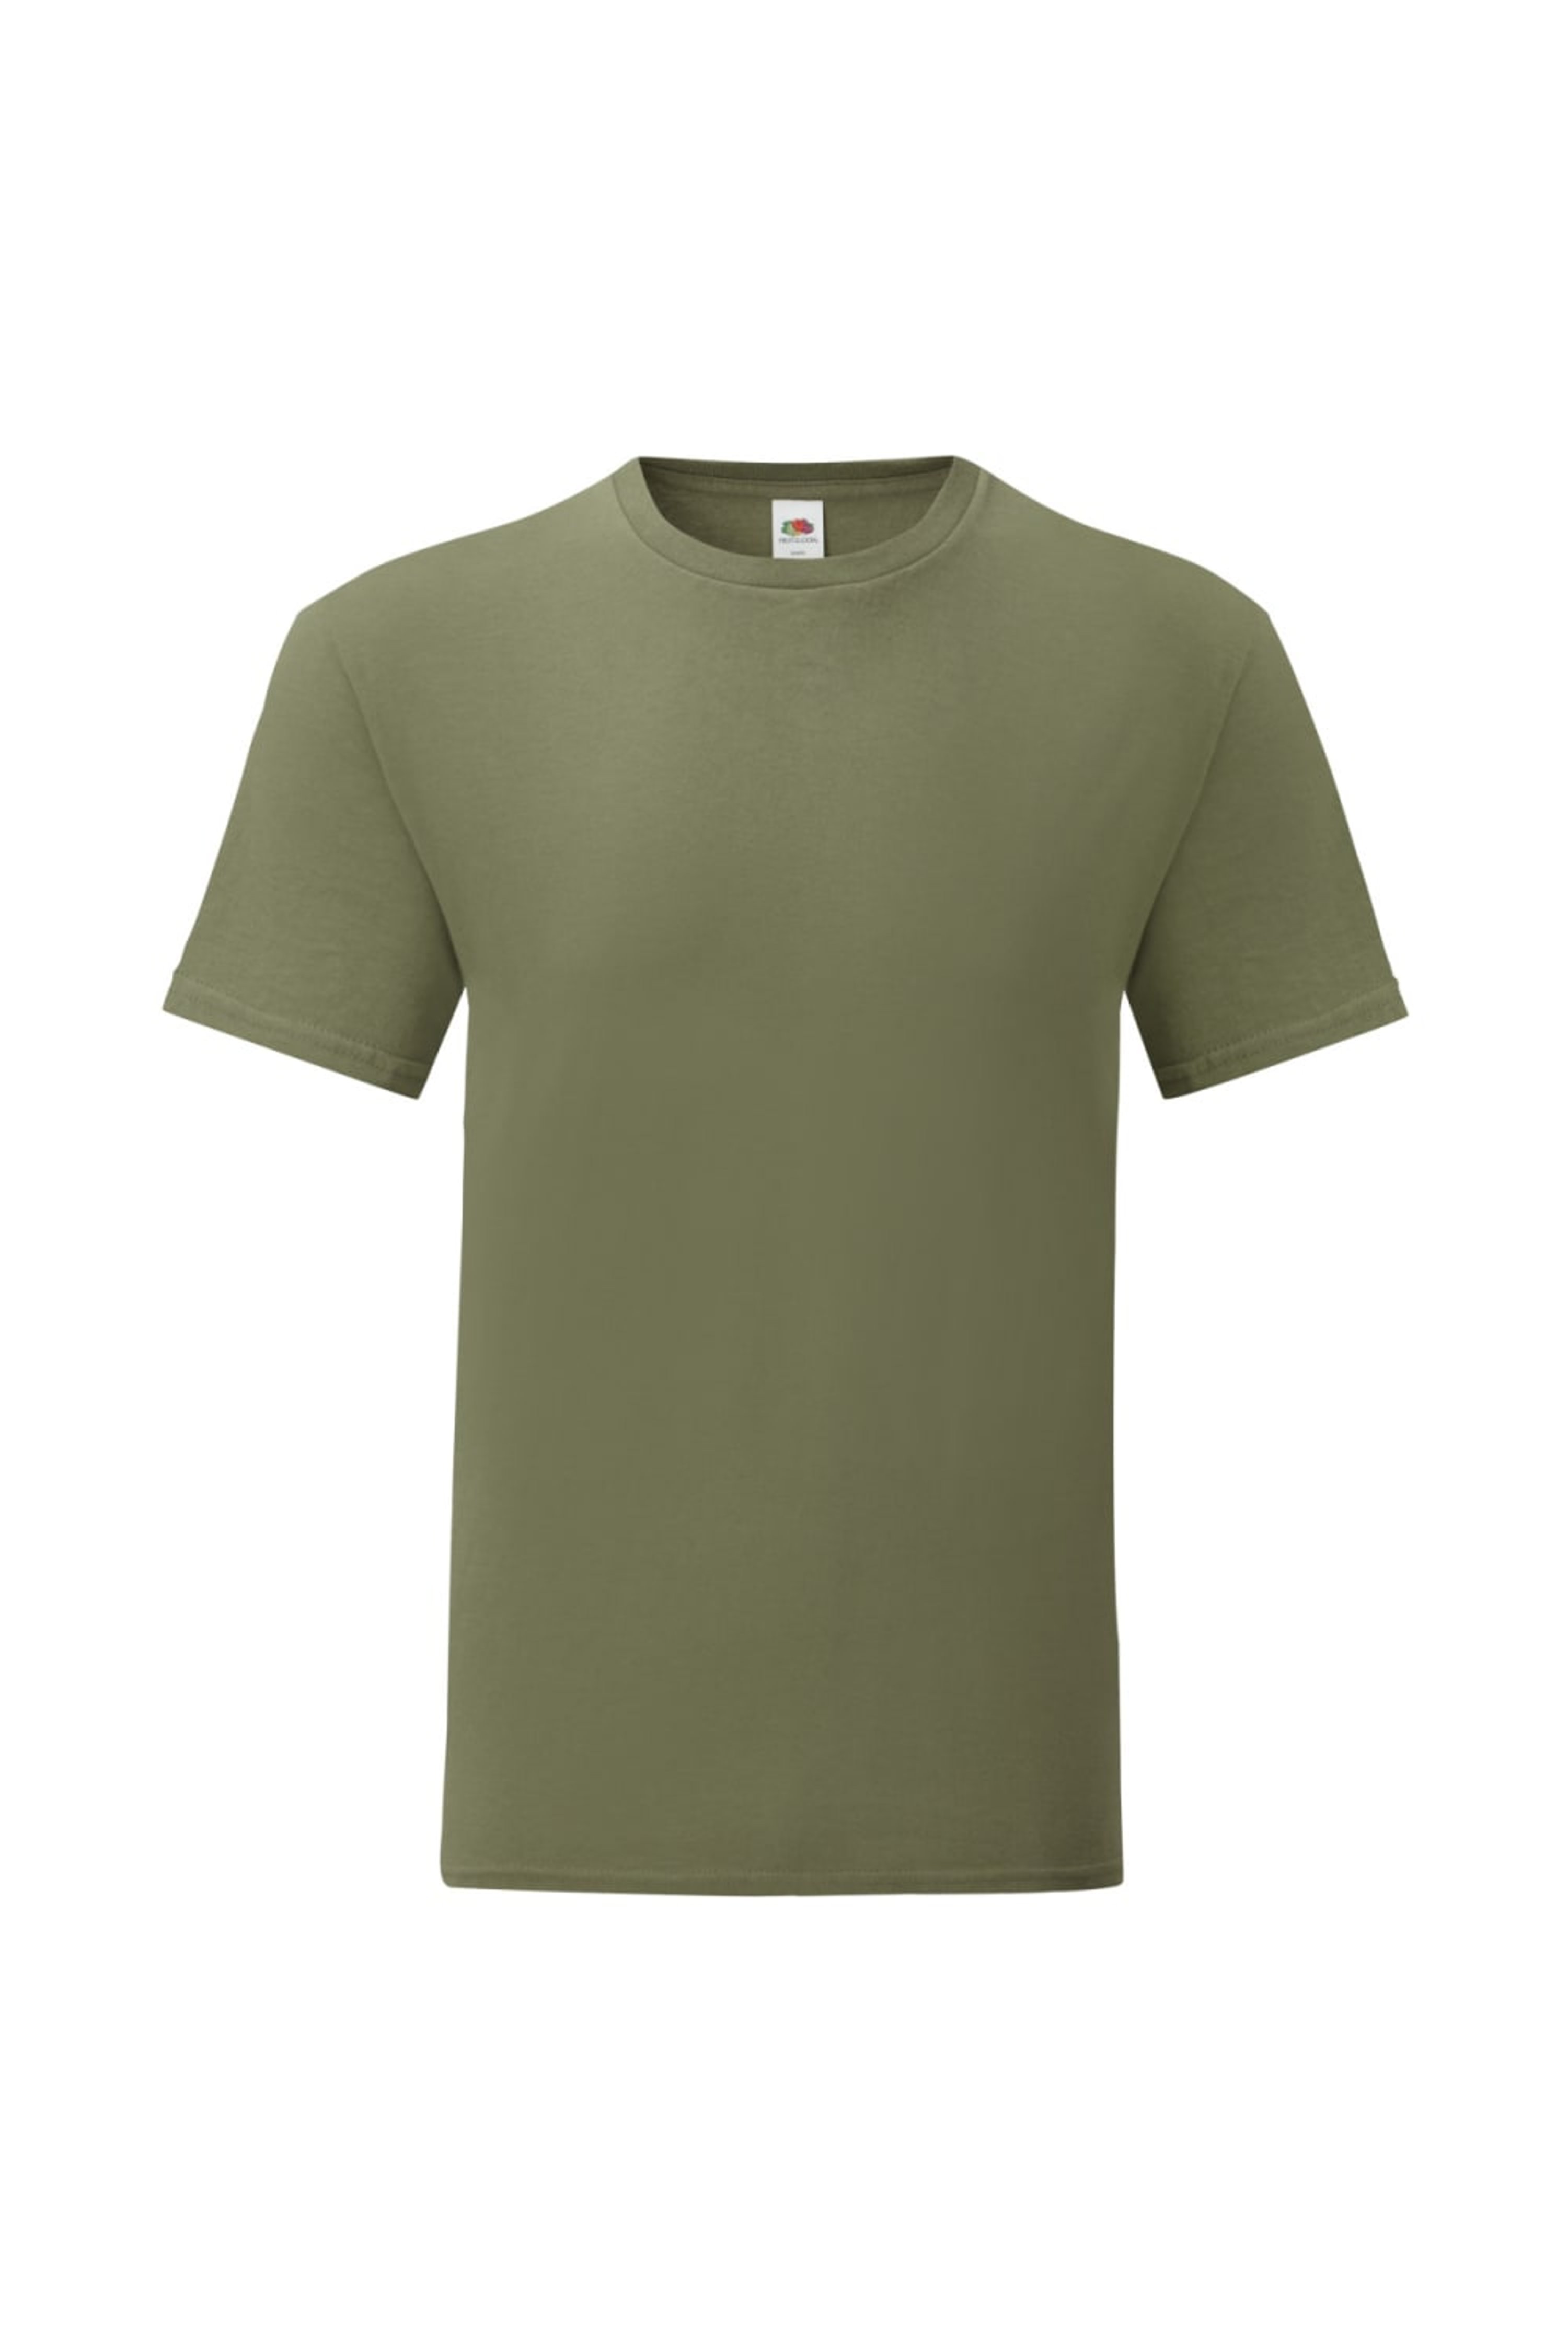 FRUIT OF THE LOOM FRUIT OF THE LOOM FRUIT OF THE LOOM MENS ICONIC T-SHIRT (PACK OF 5) (CLASSIC OLIVE GREEN)